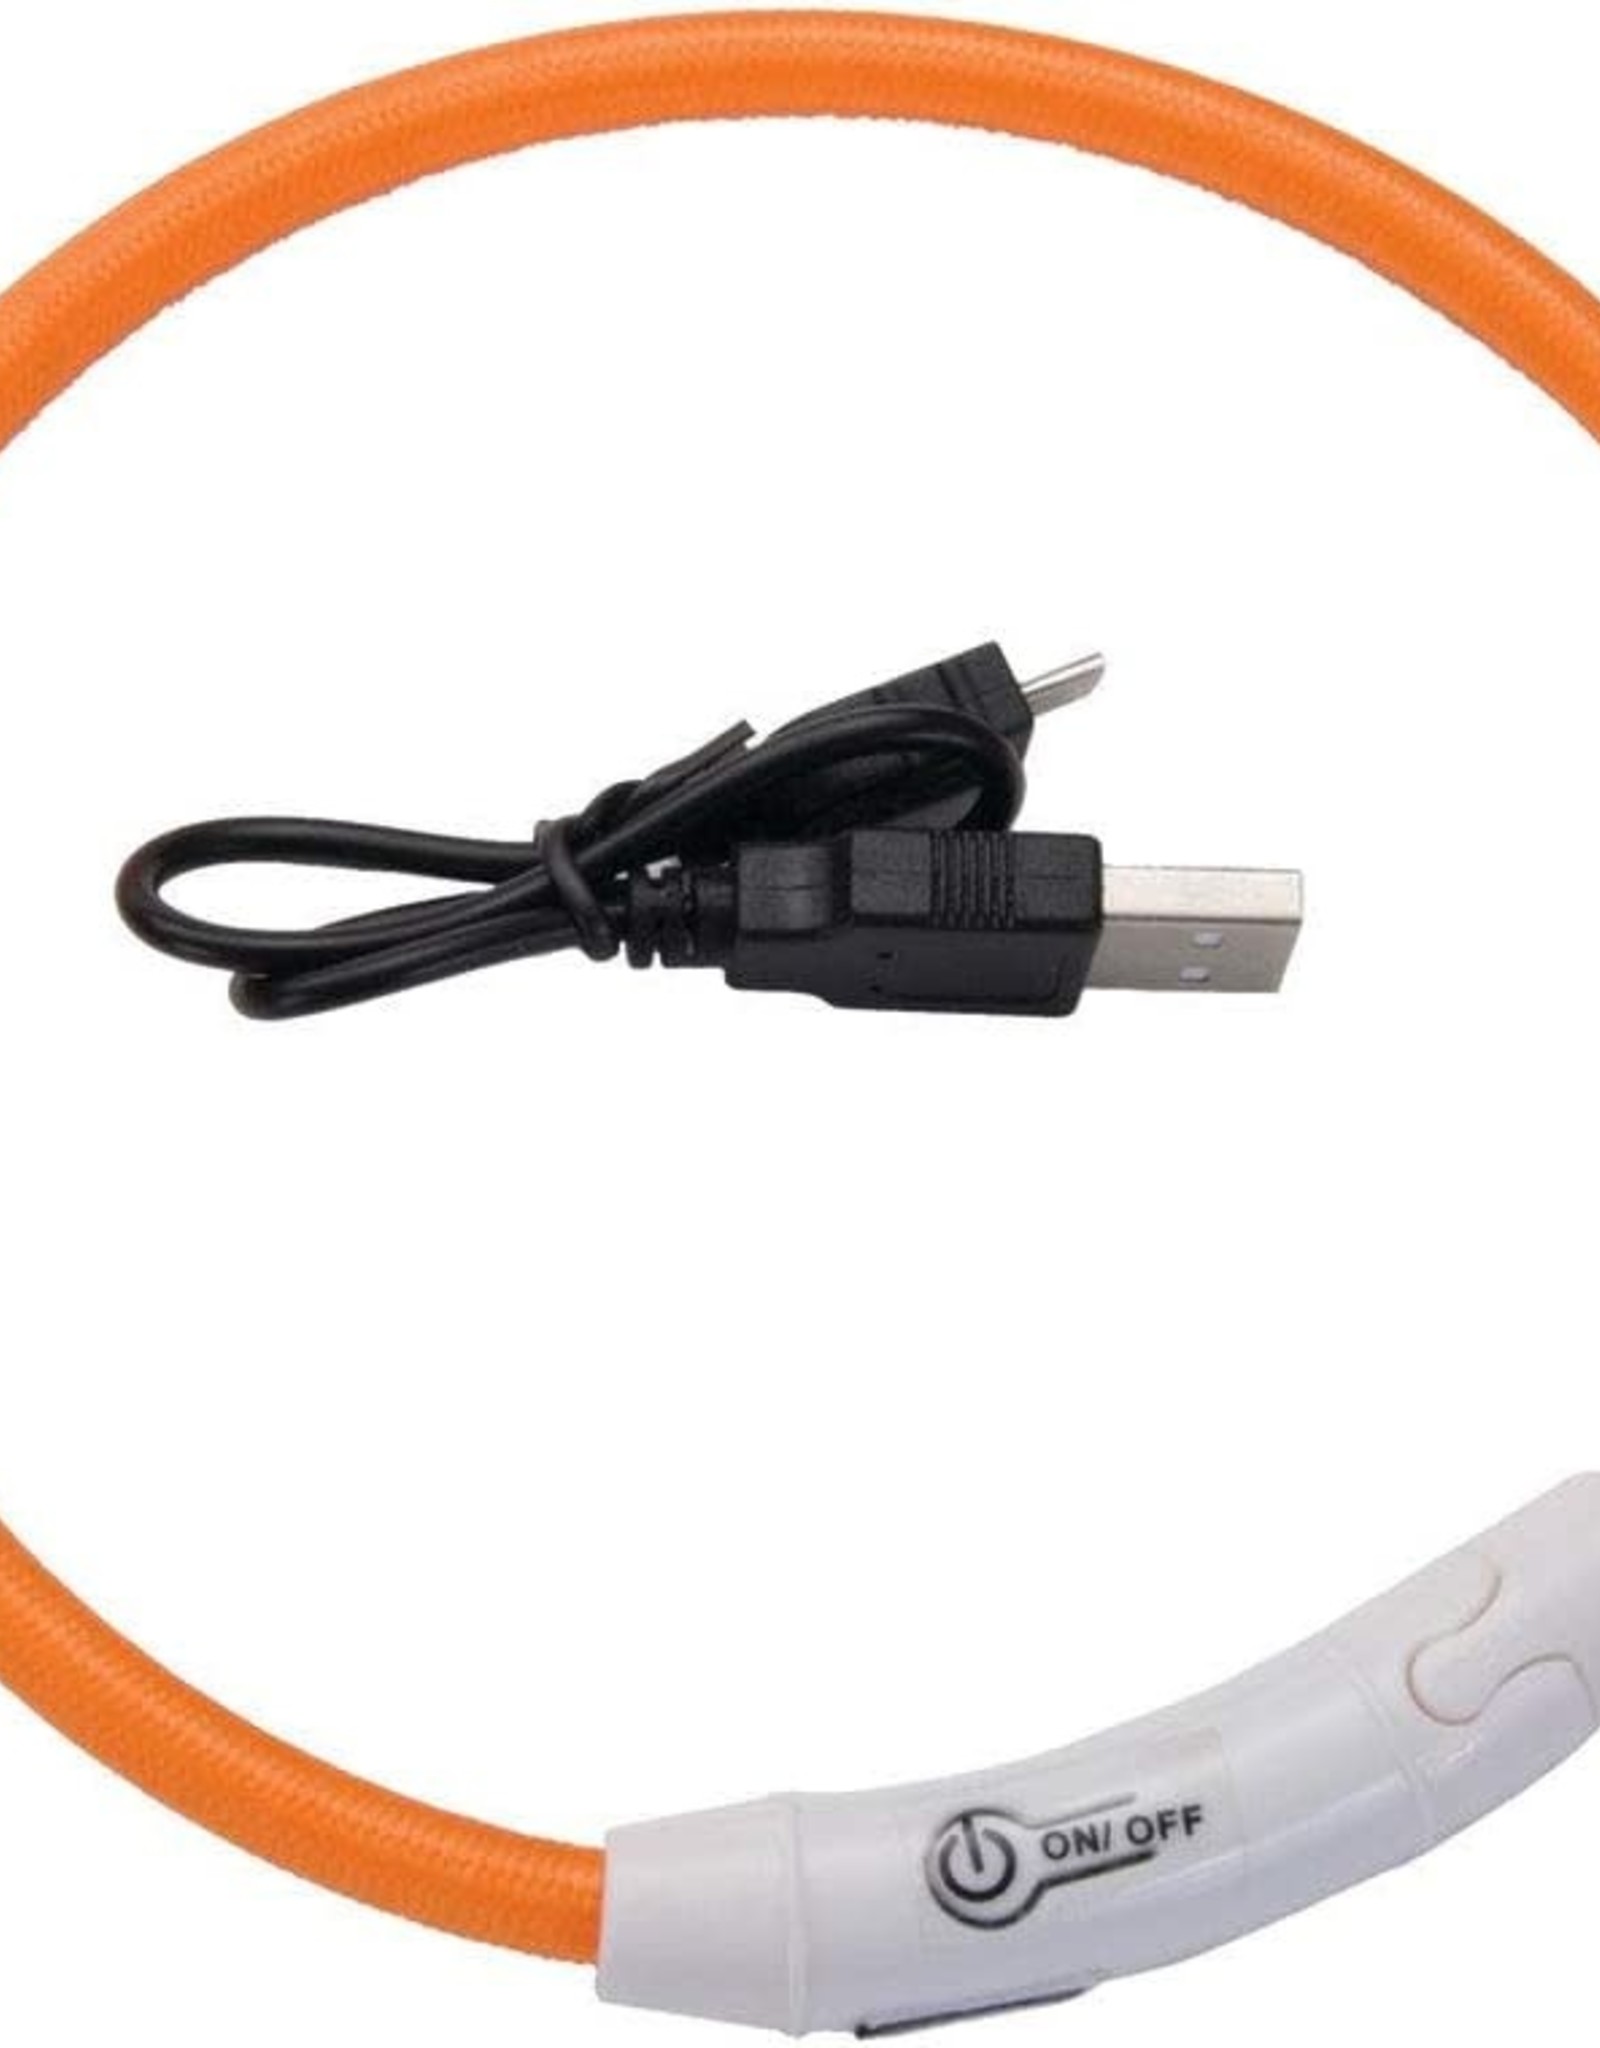 COASTAL PET PRODUCTS Orange 24 in LightUp Neck Ring